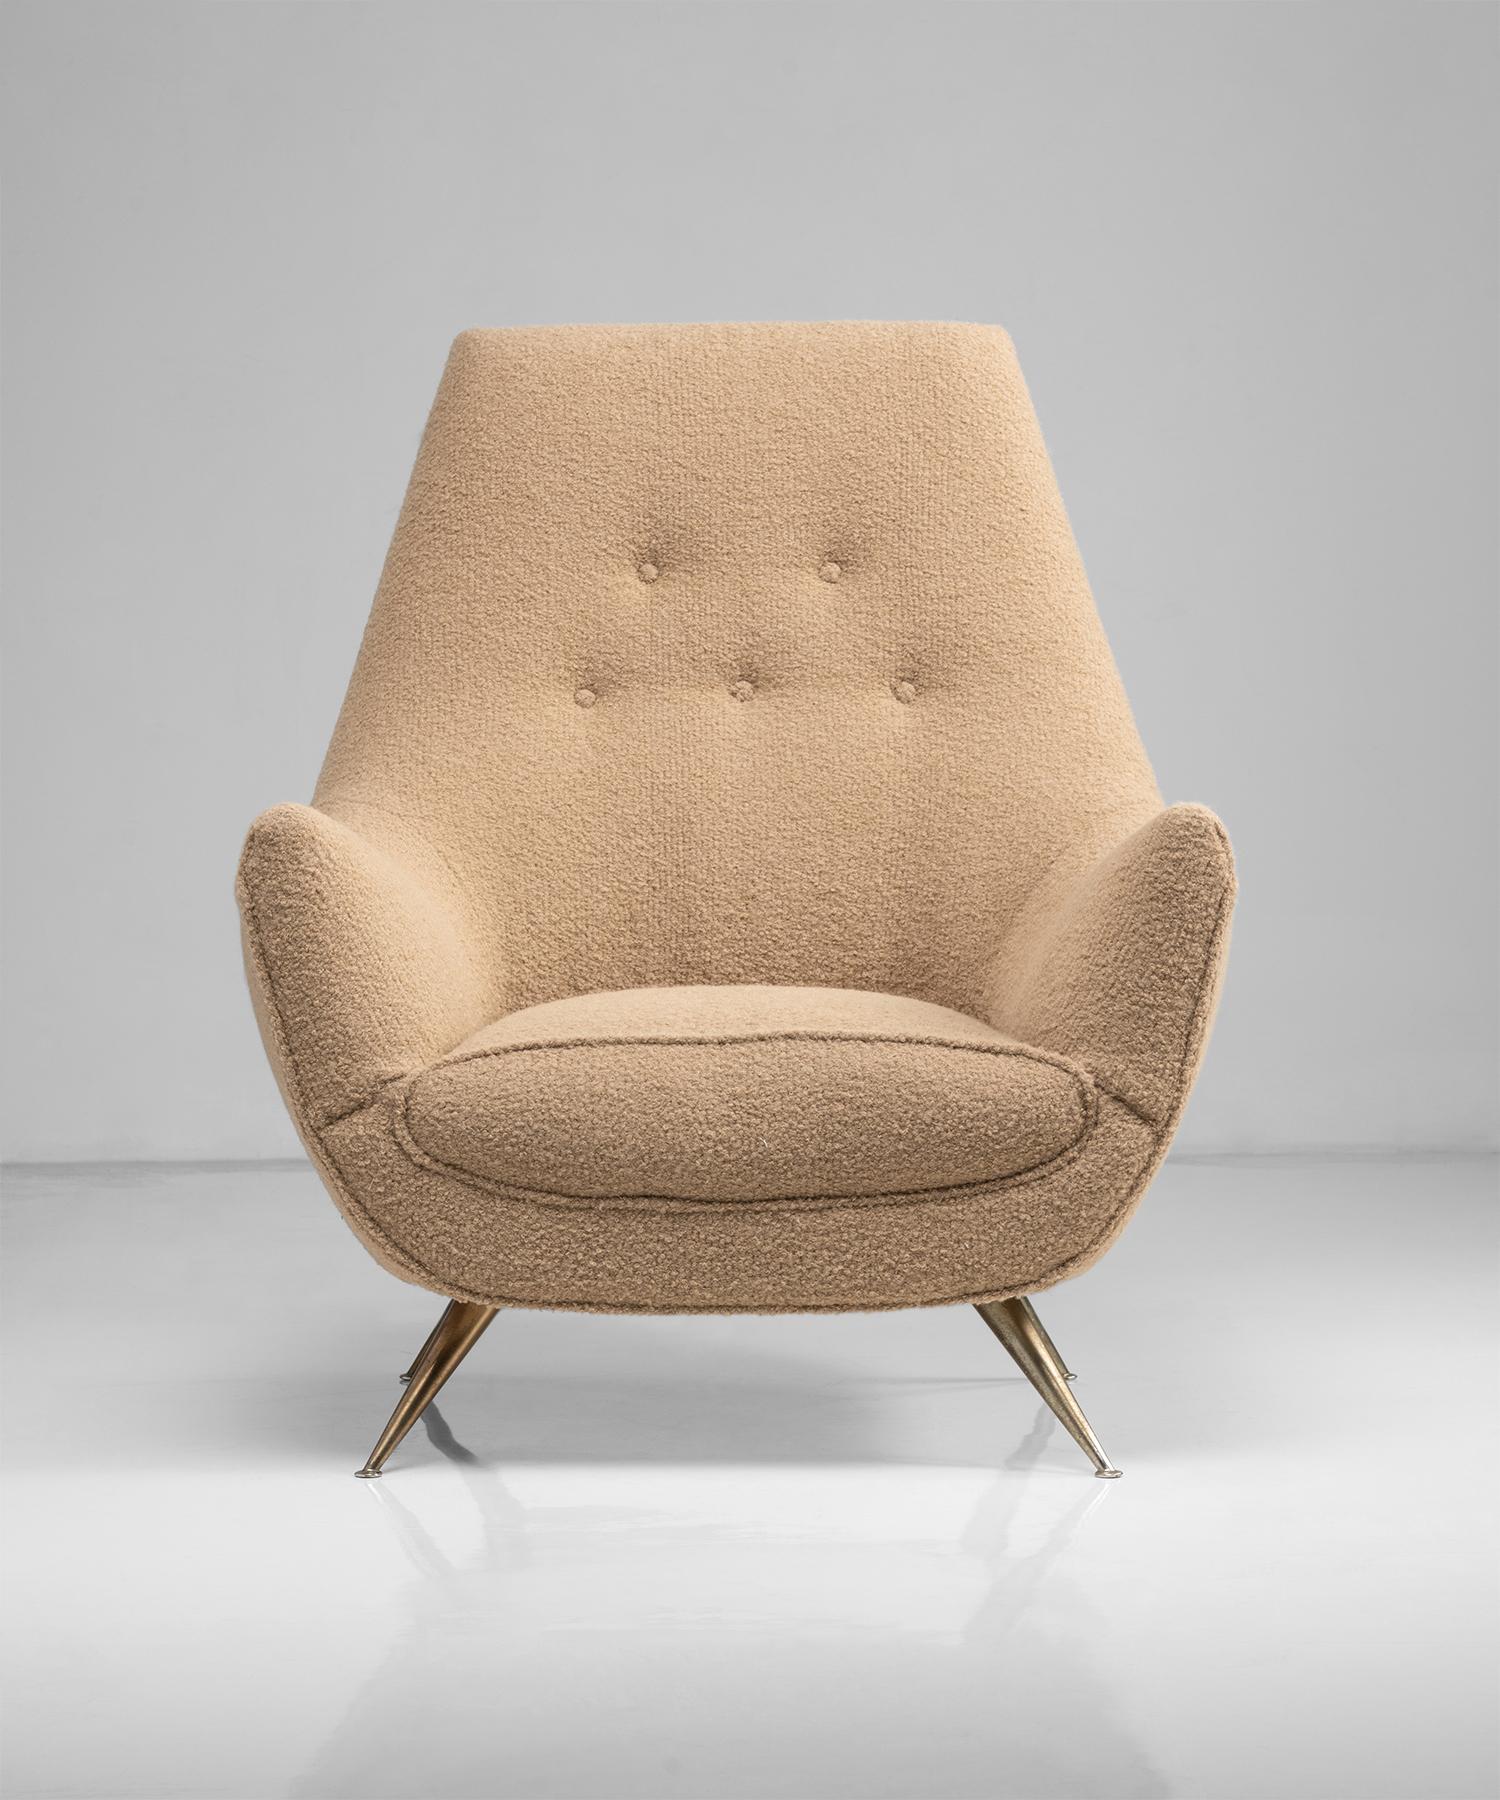 Lounge chair by Henry P. Glass

America Circa 1955

Modern button back armchair newly upholstered in Alpaca Boucle fabric by Rosemary Hallgarten.

Measures: 34.5” W x 29” D x 41.5” H x 14.5”seat.